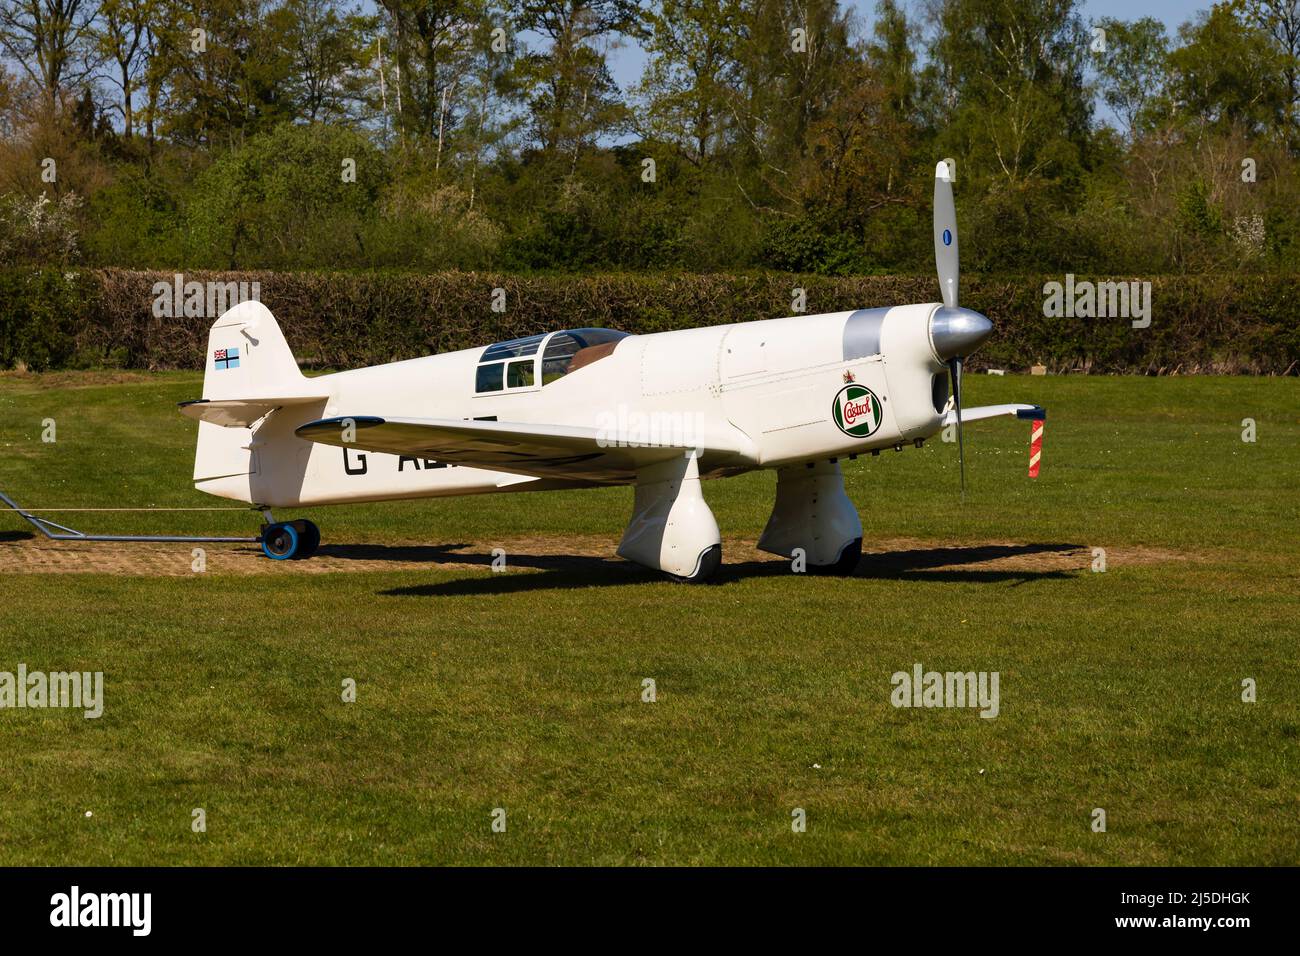 Percival Mew Gull racing aircraft from the 1930s on the grass at Old Warden airfield, Bedfordshire, England. Shuttleworth collection Stock Photo